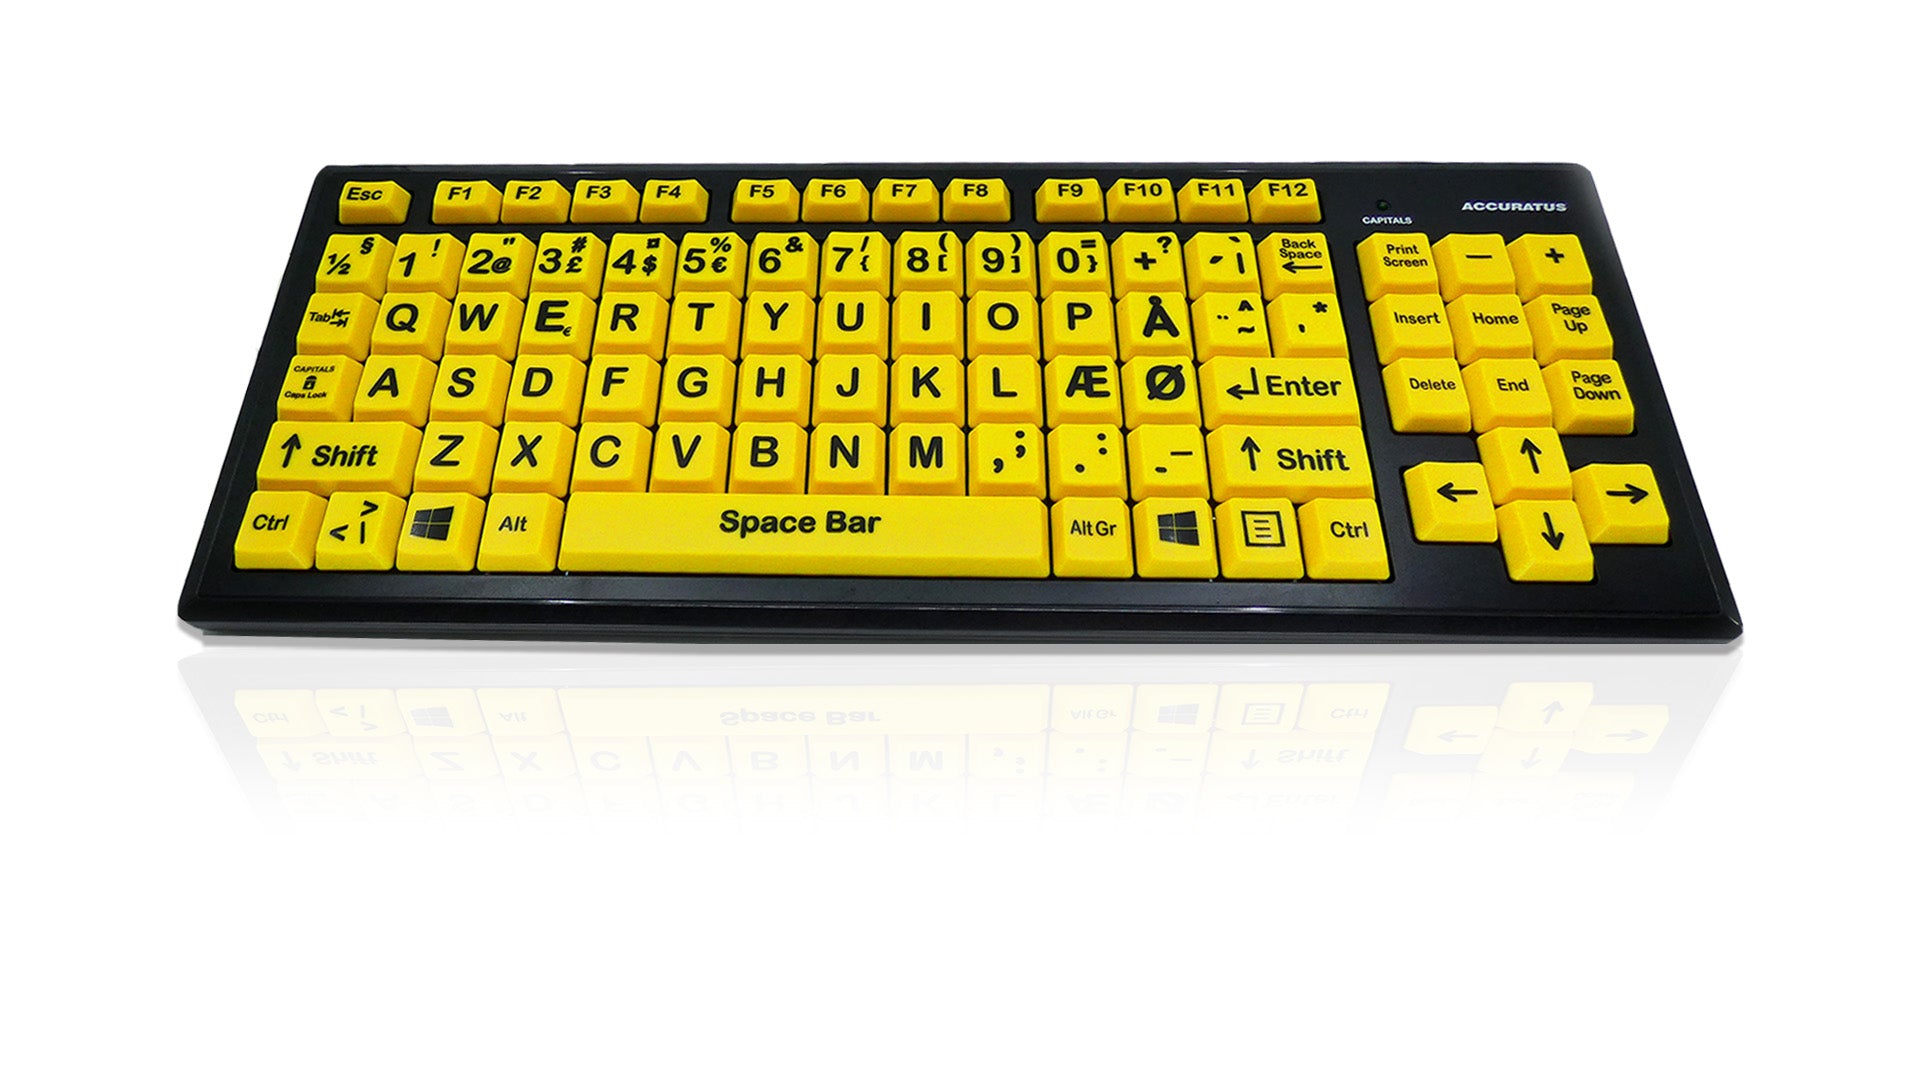 Accuratus Monster 2 - USB High Visibility Visual Impairment Keyboard with Extra Large Keys & 2 Port USB Hub